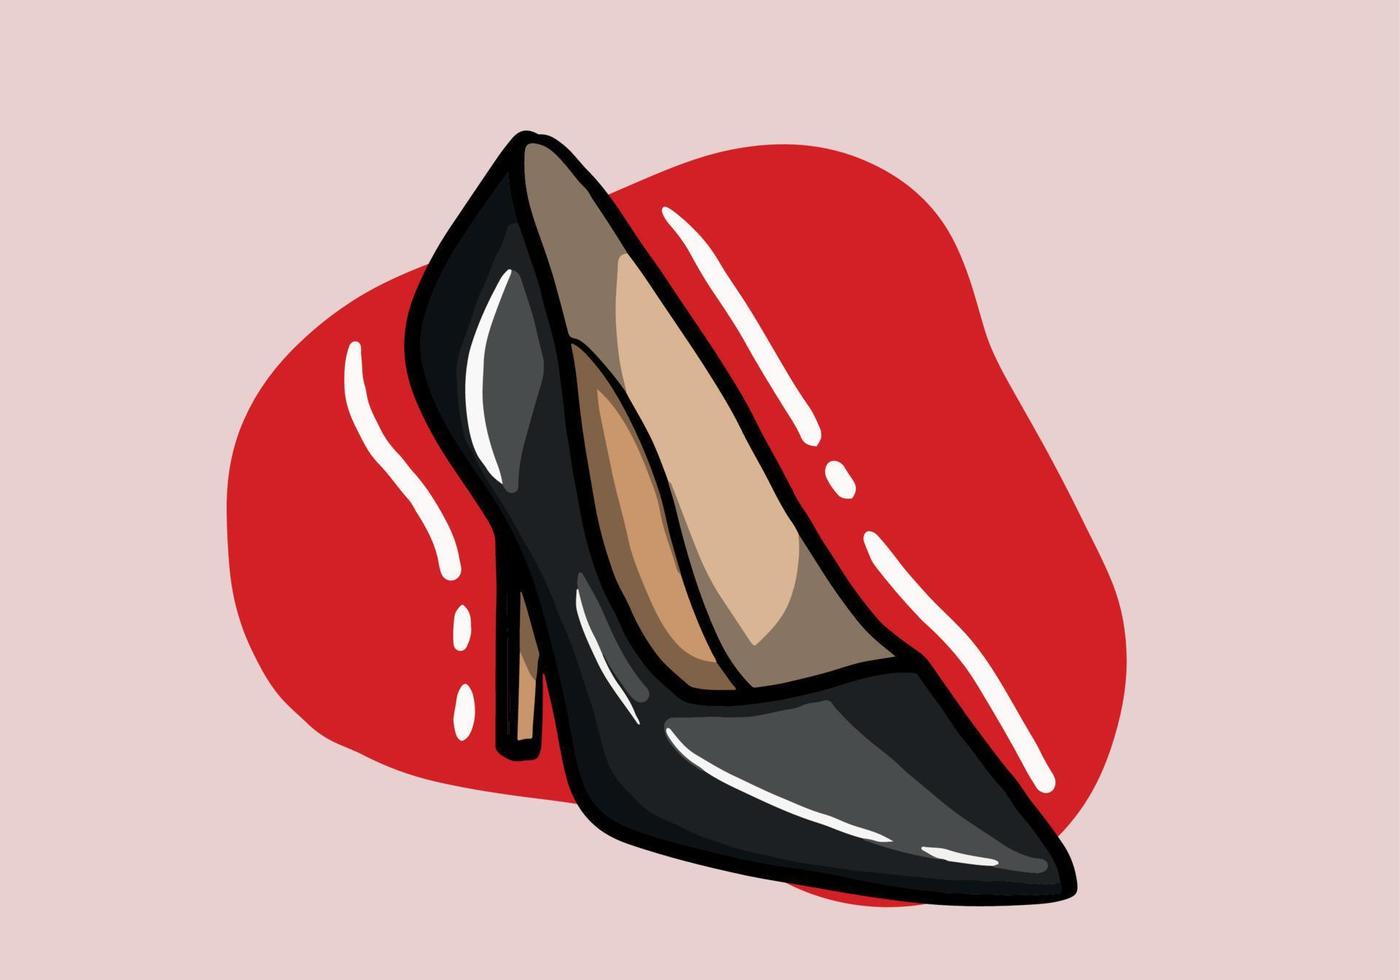 Hand drawn vector illustration of elegant fashionable black womens shoe with high heel isolated on background